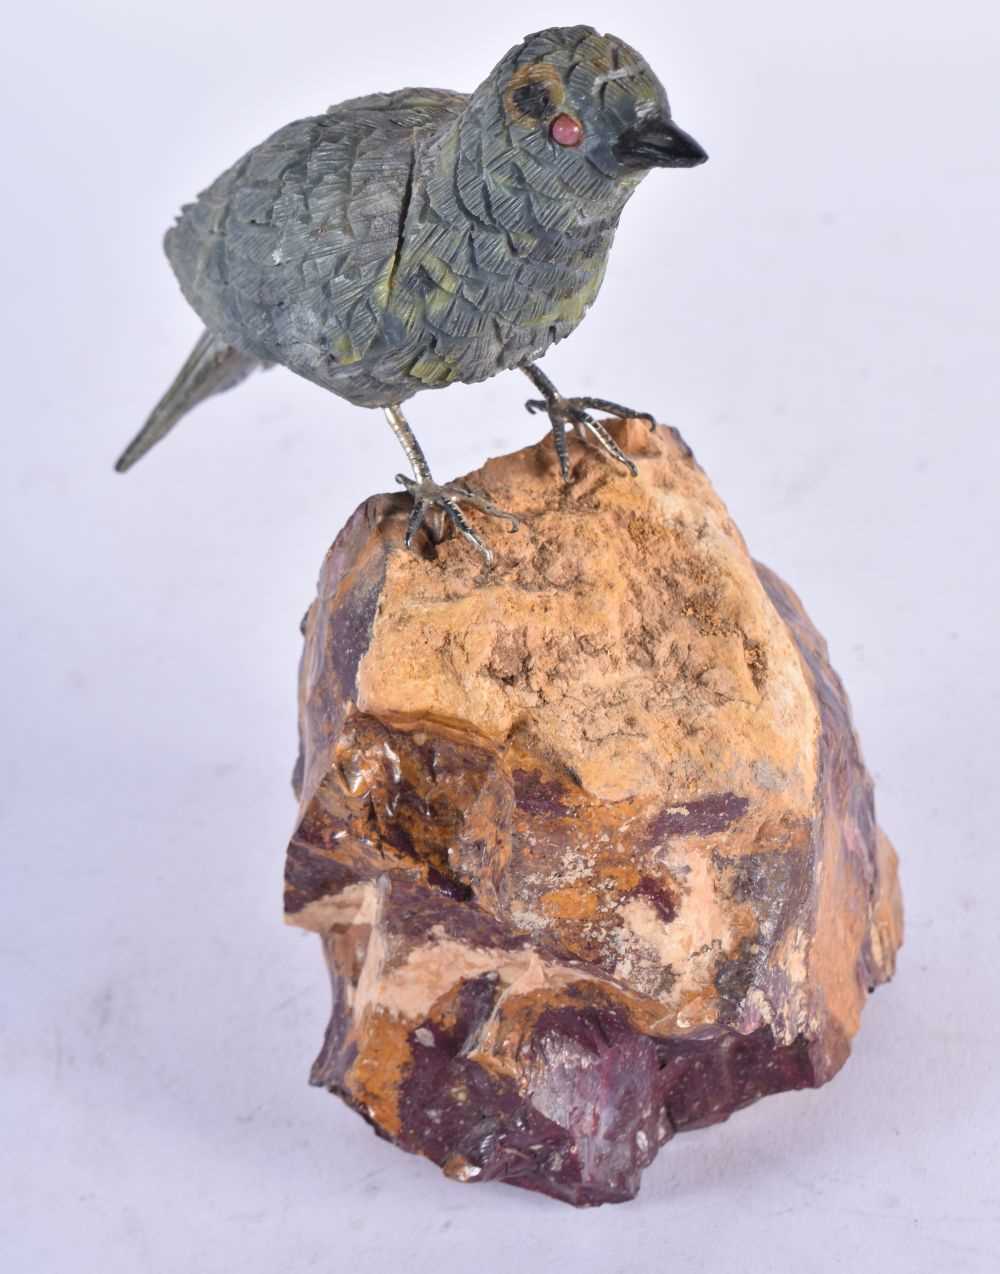 A Carved Hardstone Model of a Bird with Silver Feet Perched on a Rock. 13 cm x 13 cm x 4.5 cm